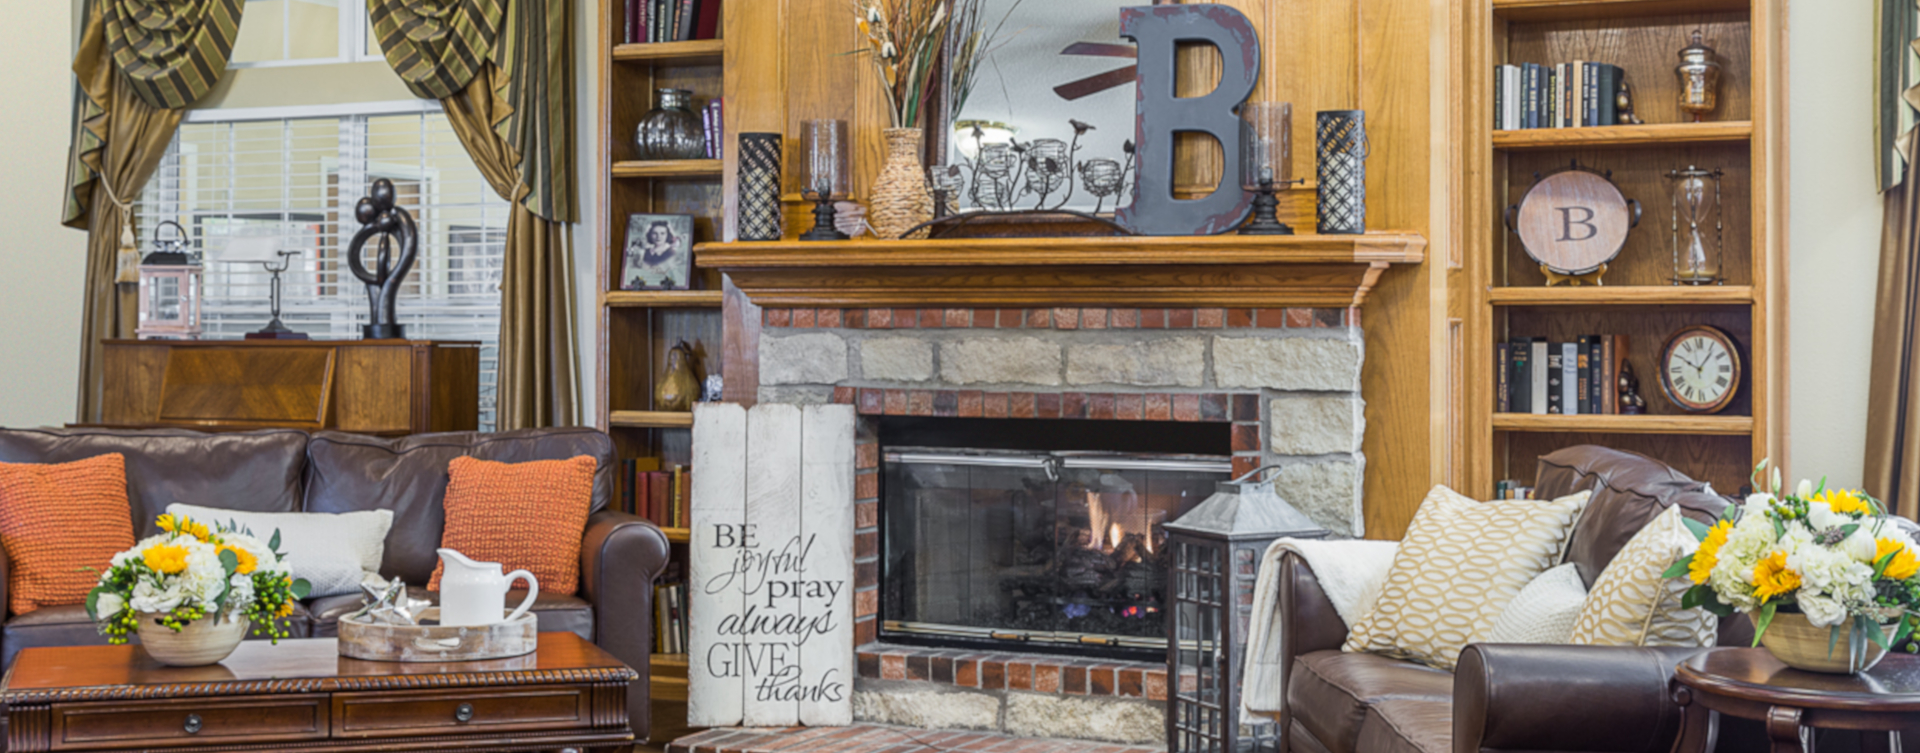 Enjoy a good book in the living room at Bickford of West Des Moines